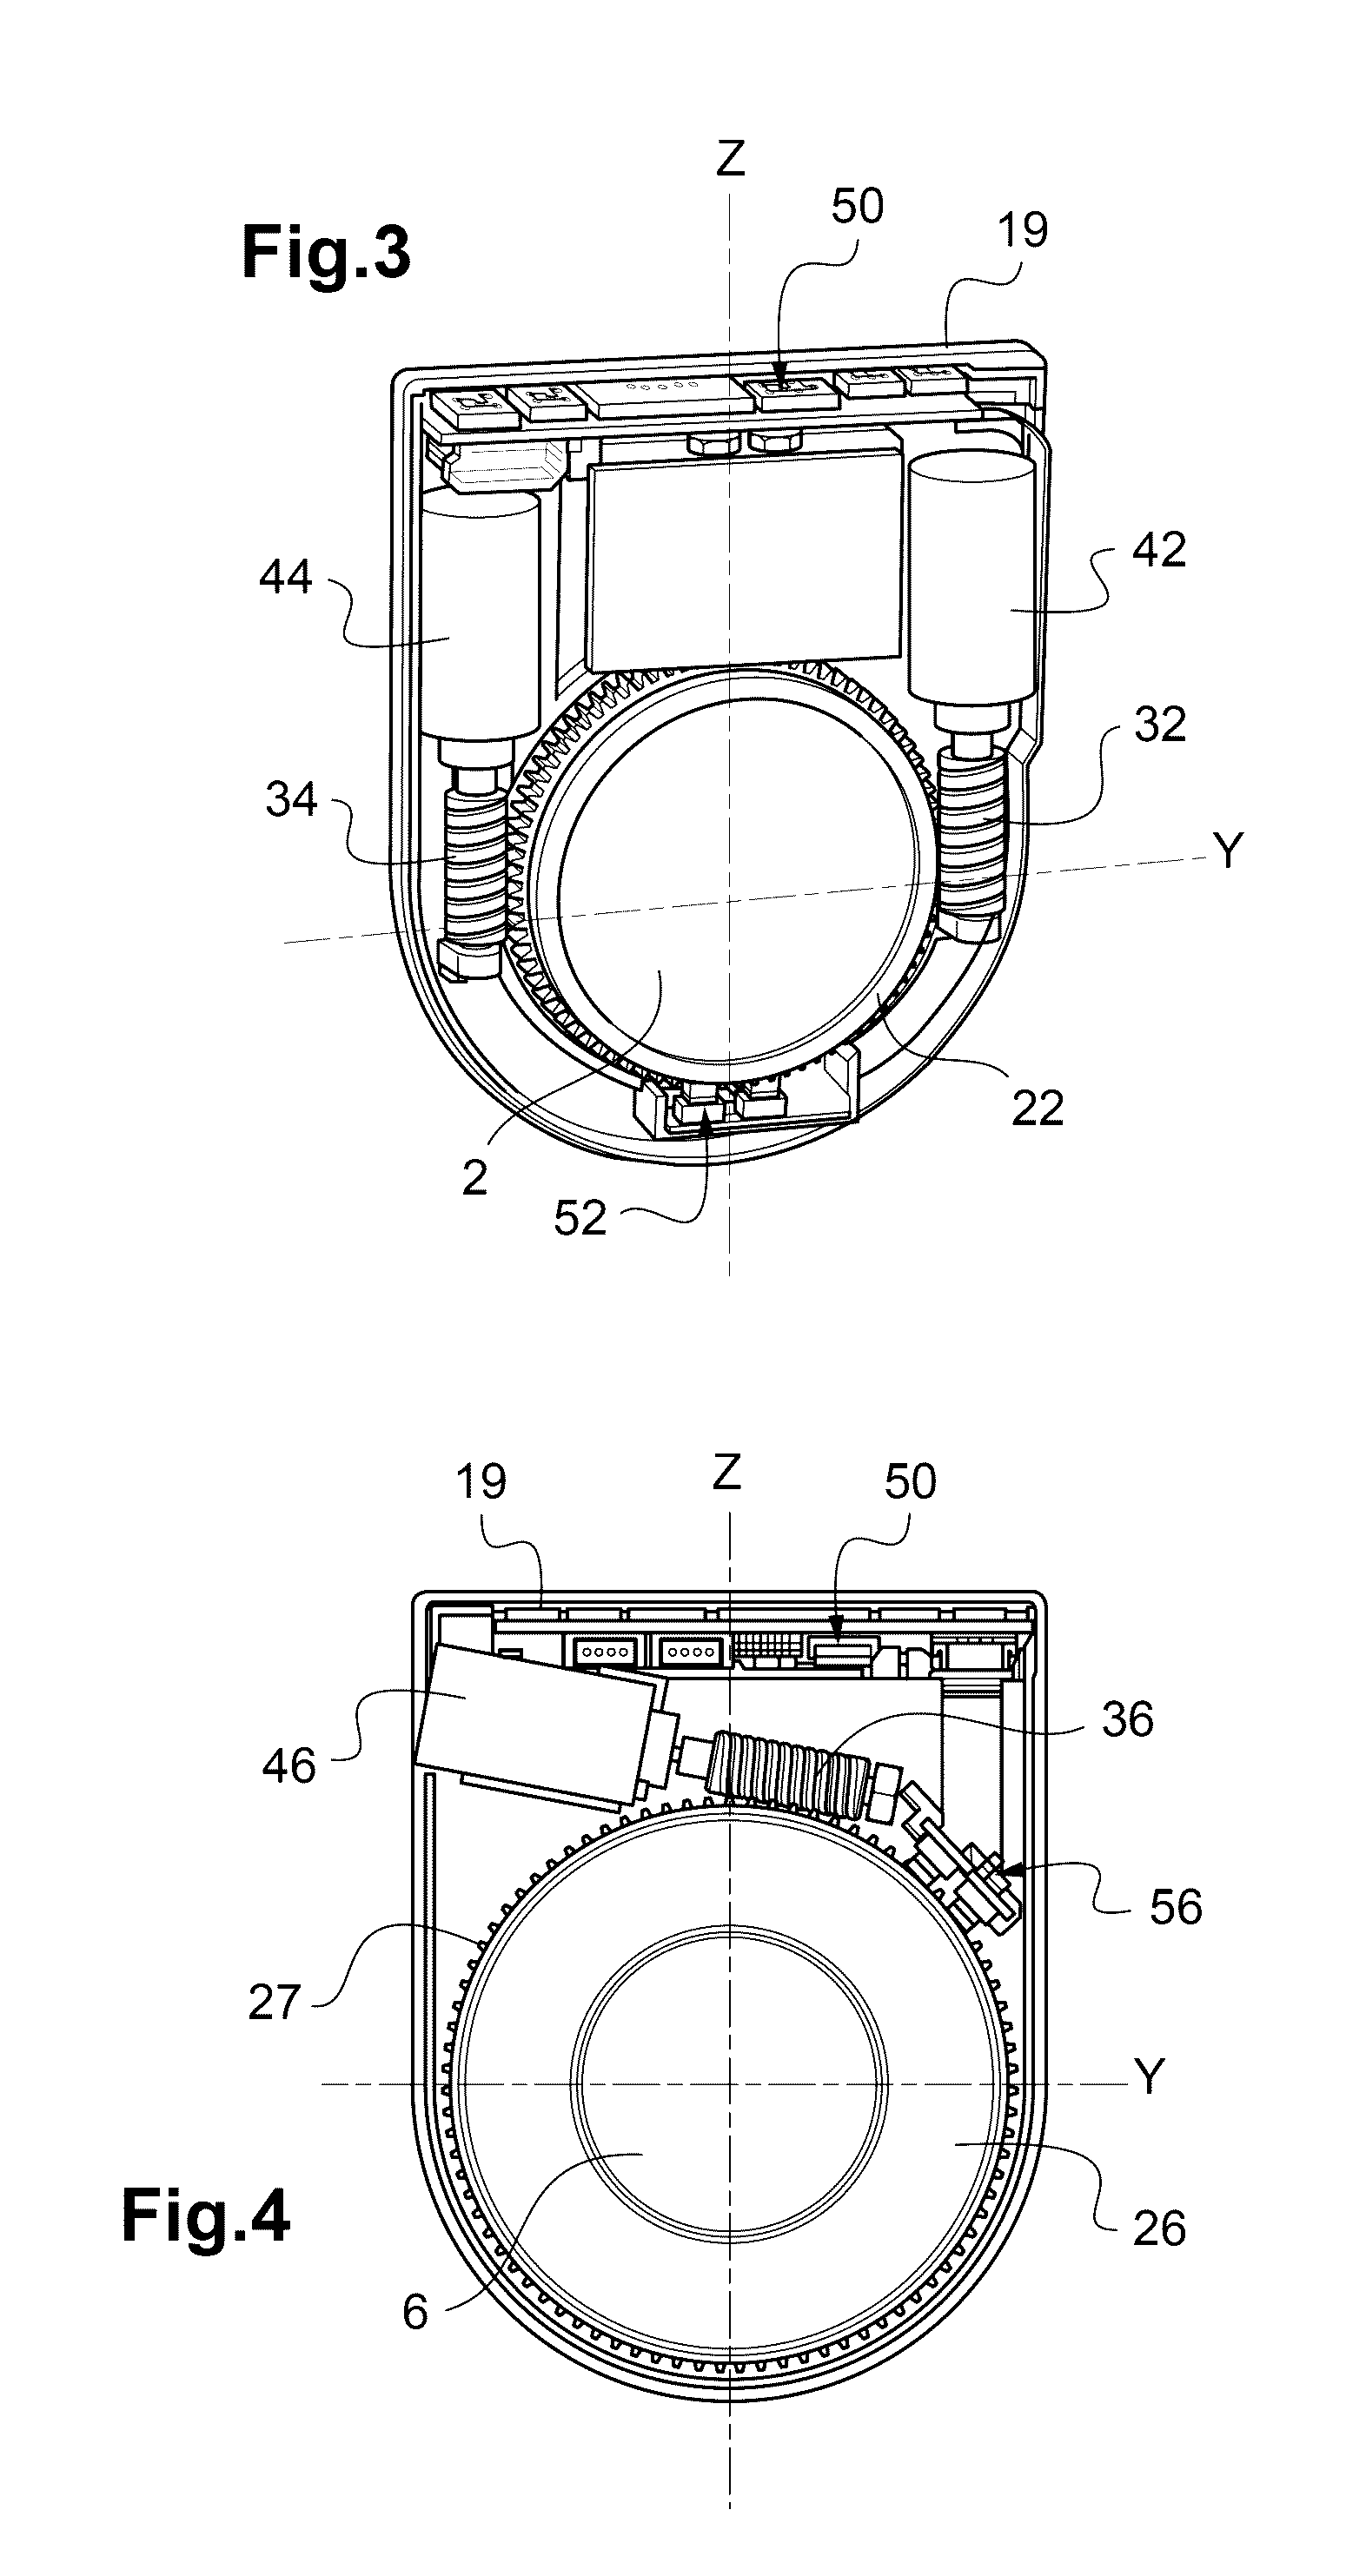 Visual compensation system and optometric binocular device